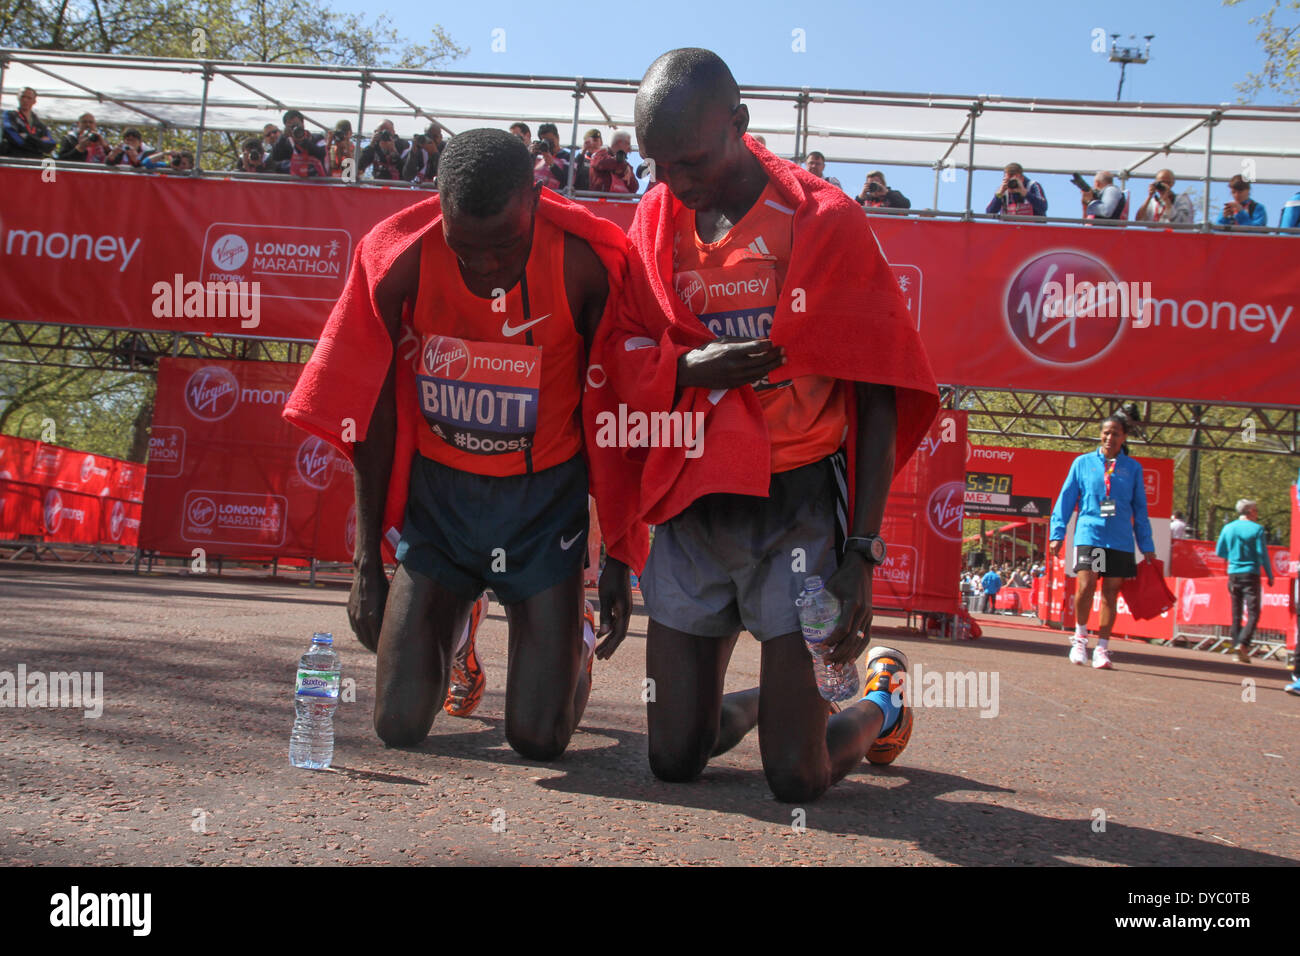 London, UK. 13th Apr, 2014. Stanley Biwott and Wilson Kipsang in prayer after the finish of the 34th London Marathon. They came second and first respectively. Credit:  David Mbiyu/Alamy Live News Stock Photo